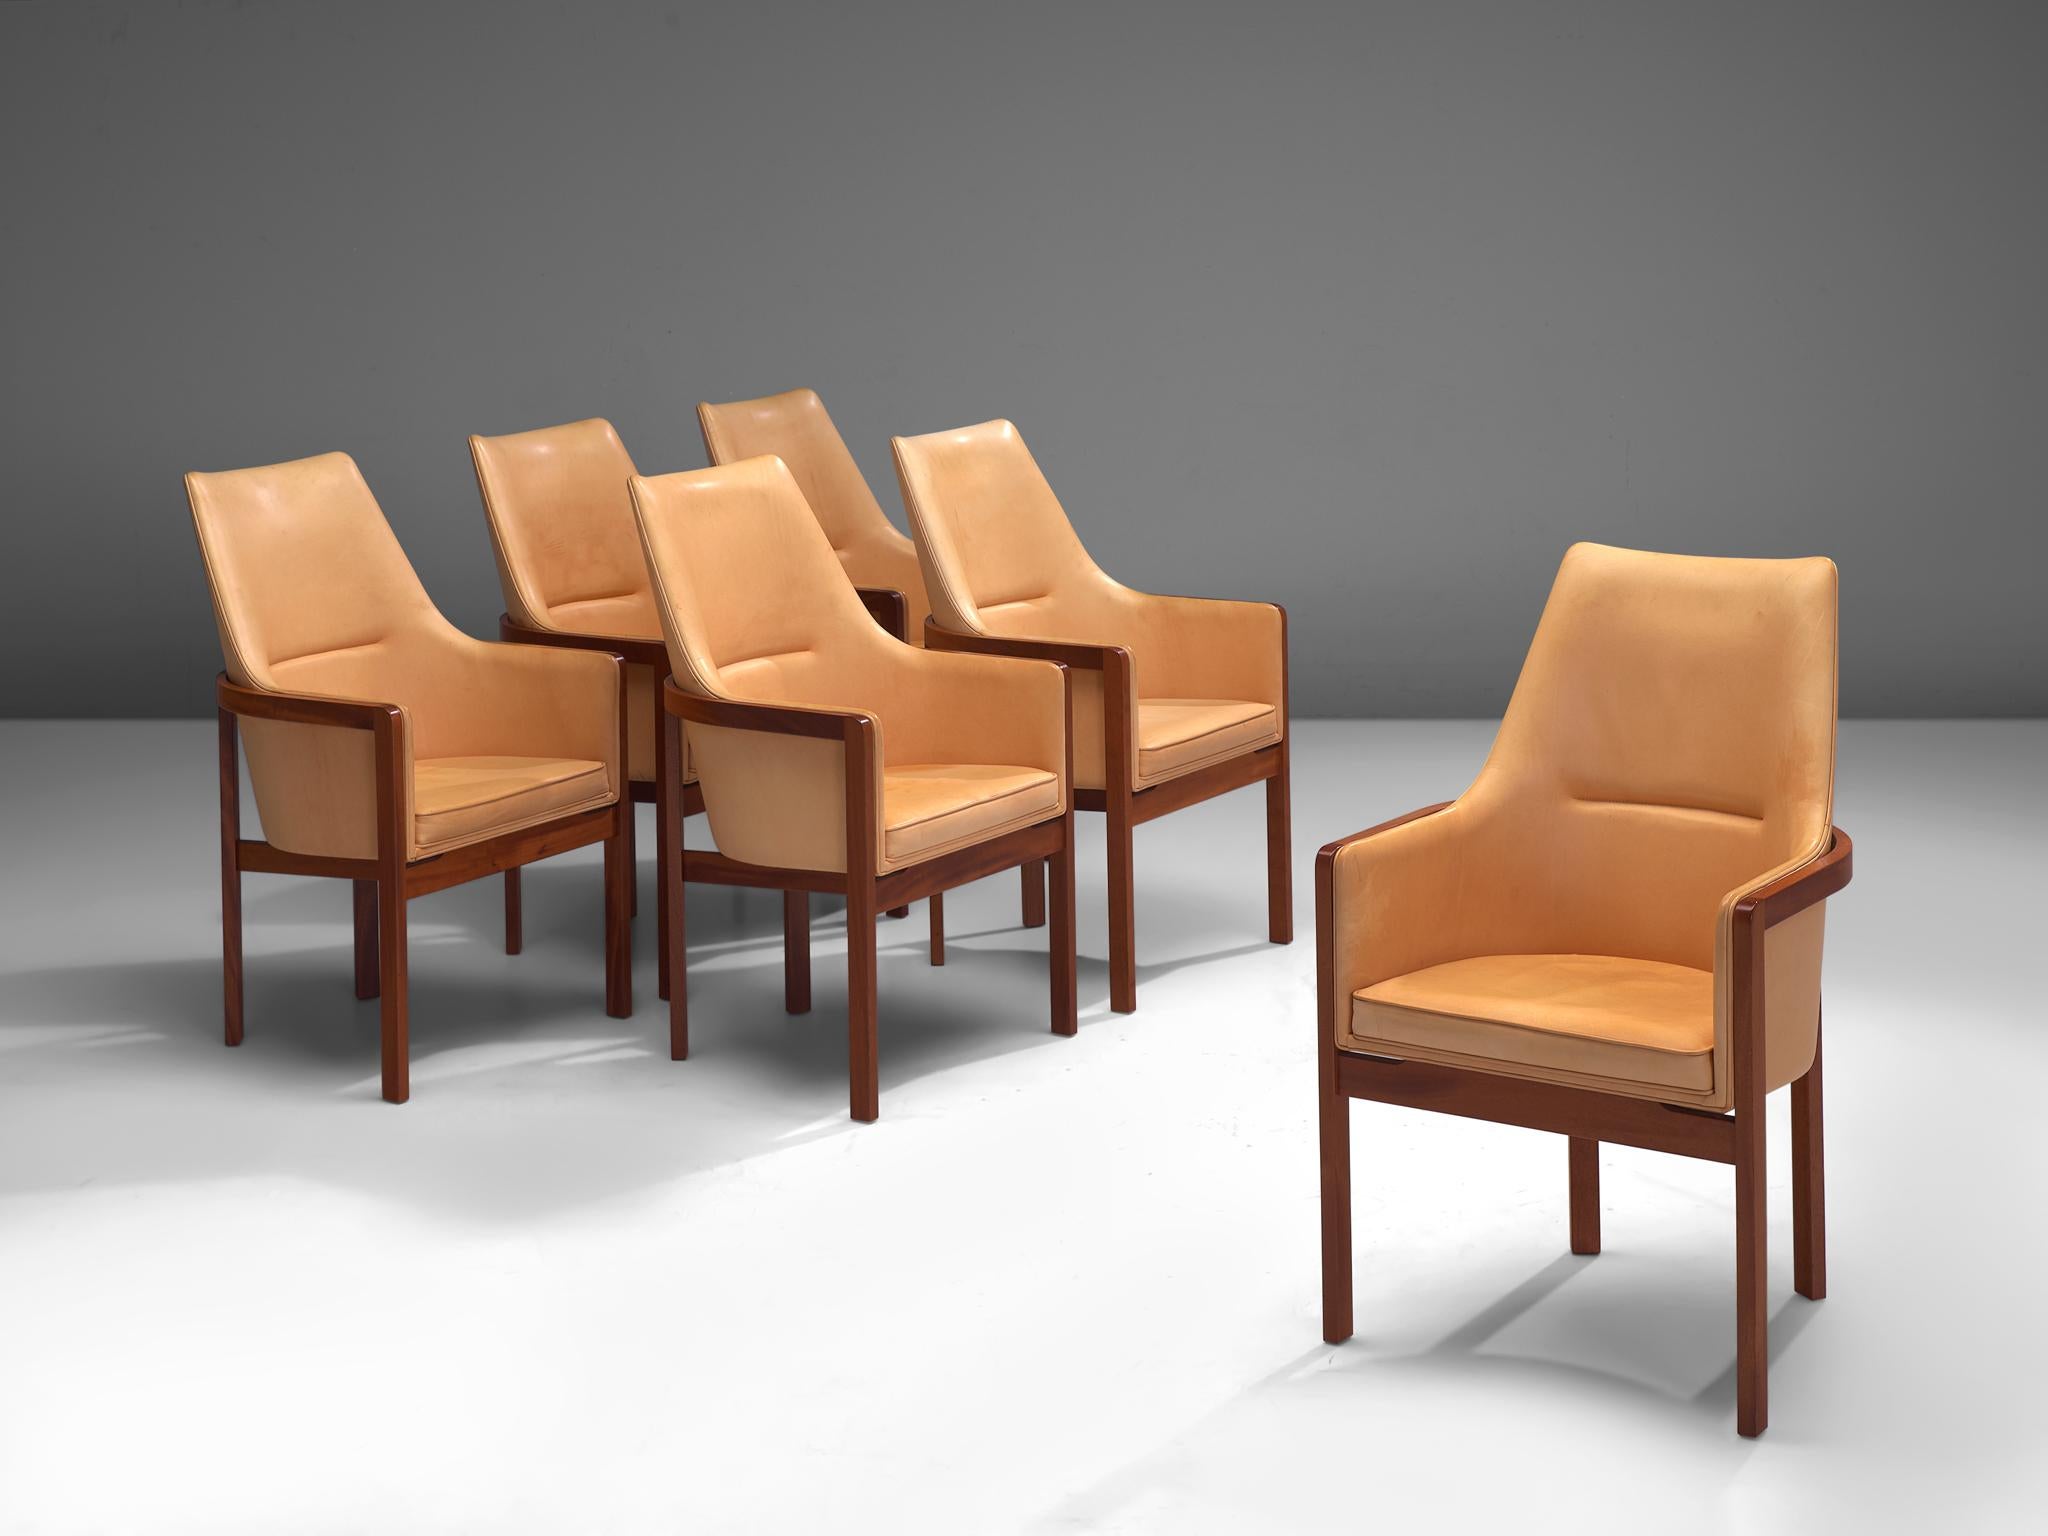 Bernt Peterson for Søborg Møbelfabrik, set of six dining chairs, leather and mahogany, Denmark, 1960s.

Elegant and comfortable set of six dining chairs desgined by Bernt in the 19650s. The chairs are executed in mahogany and naturel leather of